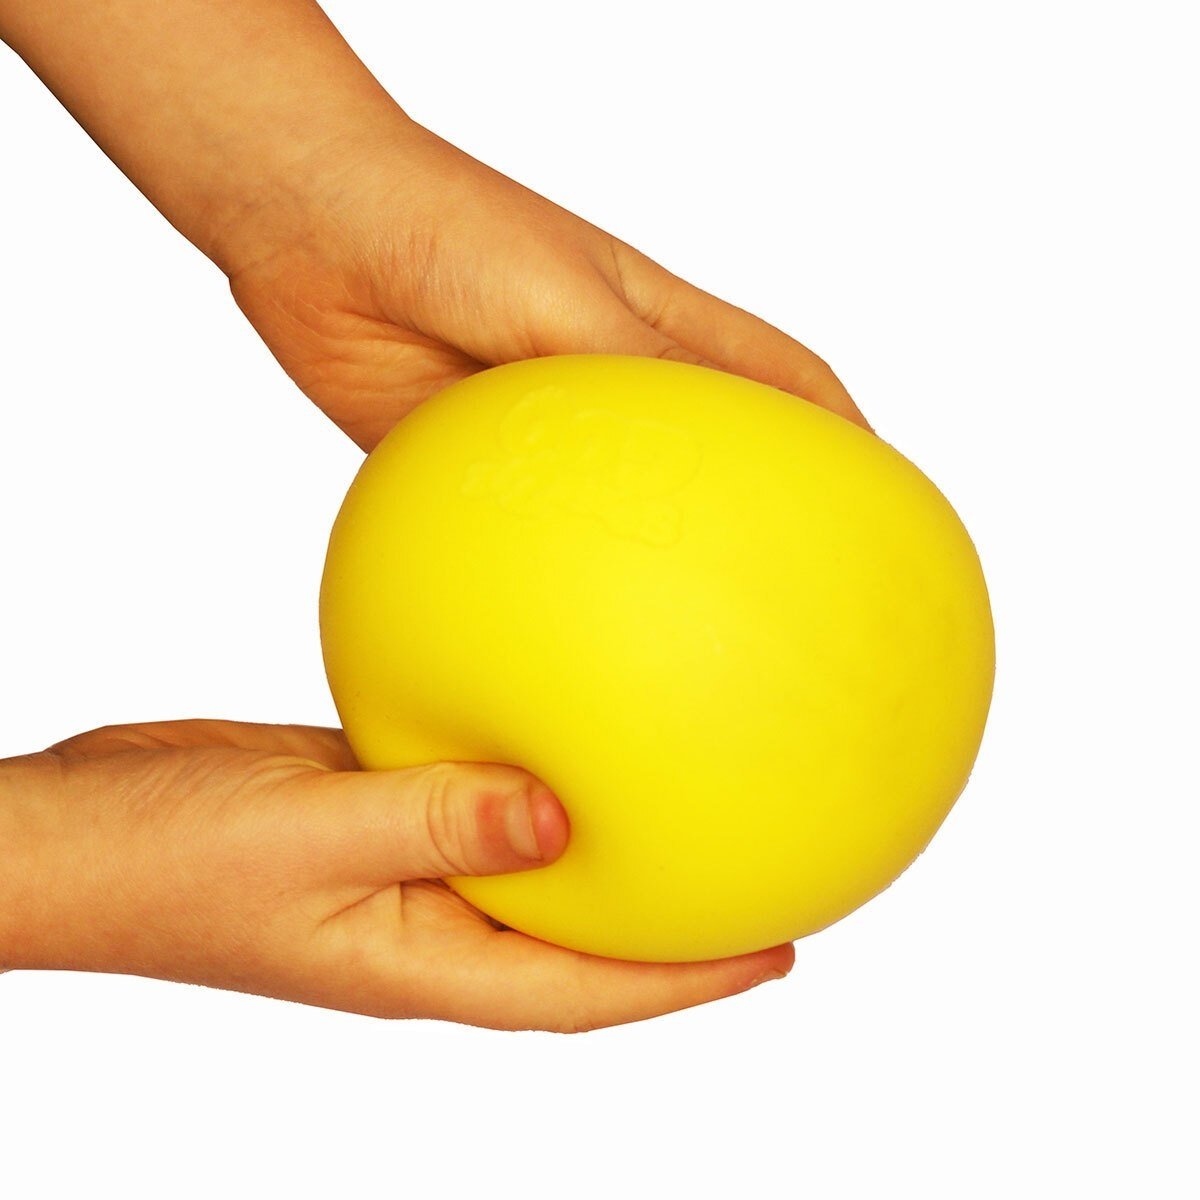 SqueeZee Goo Large Ball, Kids will love squishing and stretching this large SqueeZee Goo ball fidget toy! The squishy fun just got supersized with this large ball, this neon coloured stress ball is filled with oozy goo. Kids will love watching it squash out when they squeeze, returning to its original shape as they let go. Product features Kids will love squishing, smushing and squeezing Bring on the go for fidget-friendly fun Kids can try squeezing it when they need soothing Suitable for age 3 years + Spec